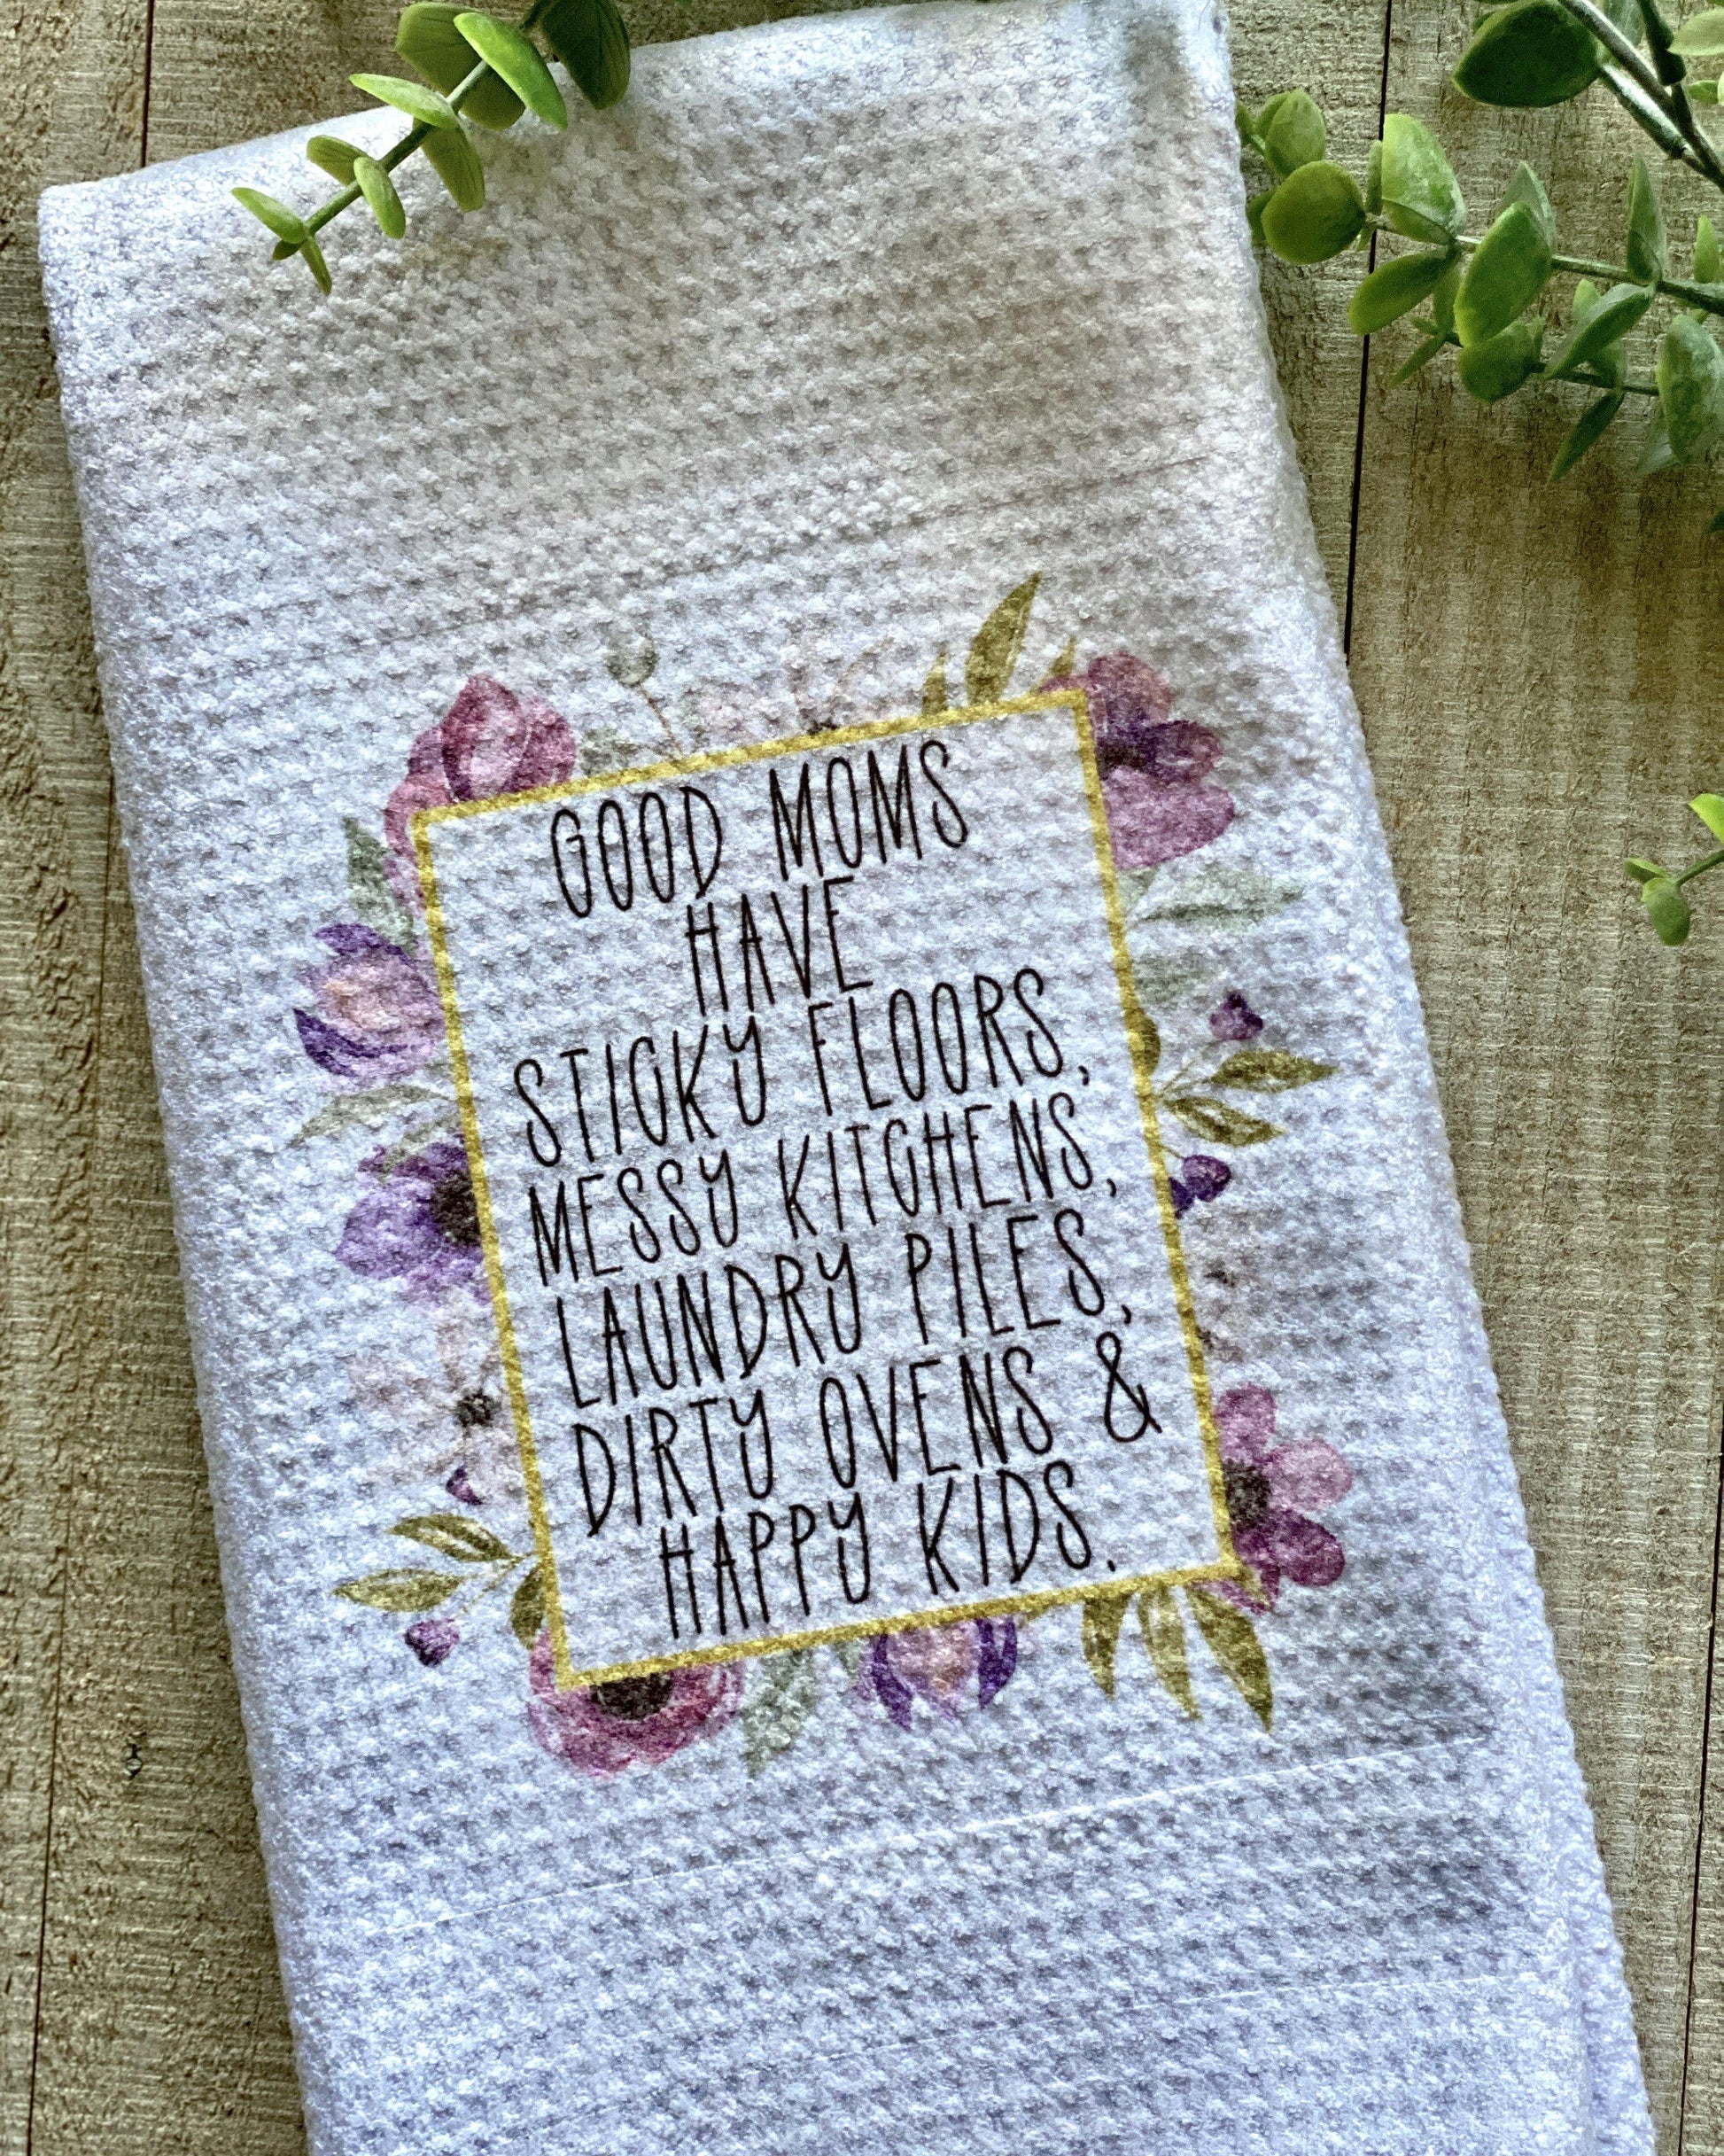 Good Moms Have Sticky Floors, Messy Kitchens, Laundry Piles, Dirty Ovens & Happy Kids - Kitchen Towel - Kitchen Towels -  Rustic Cuts